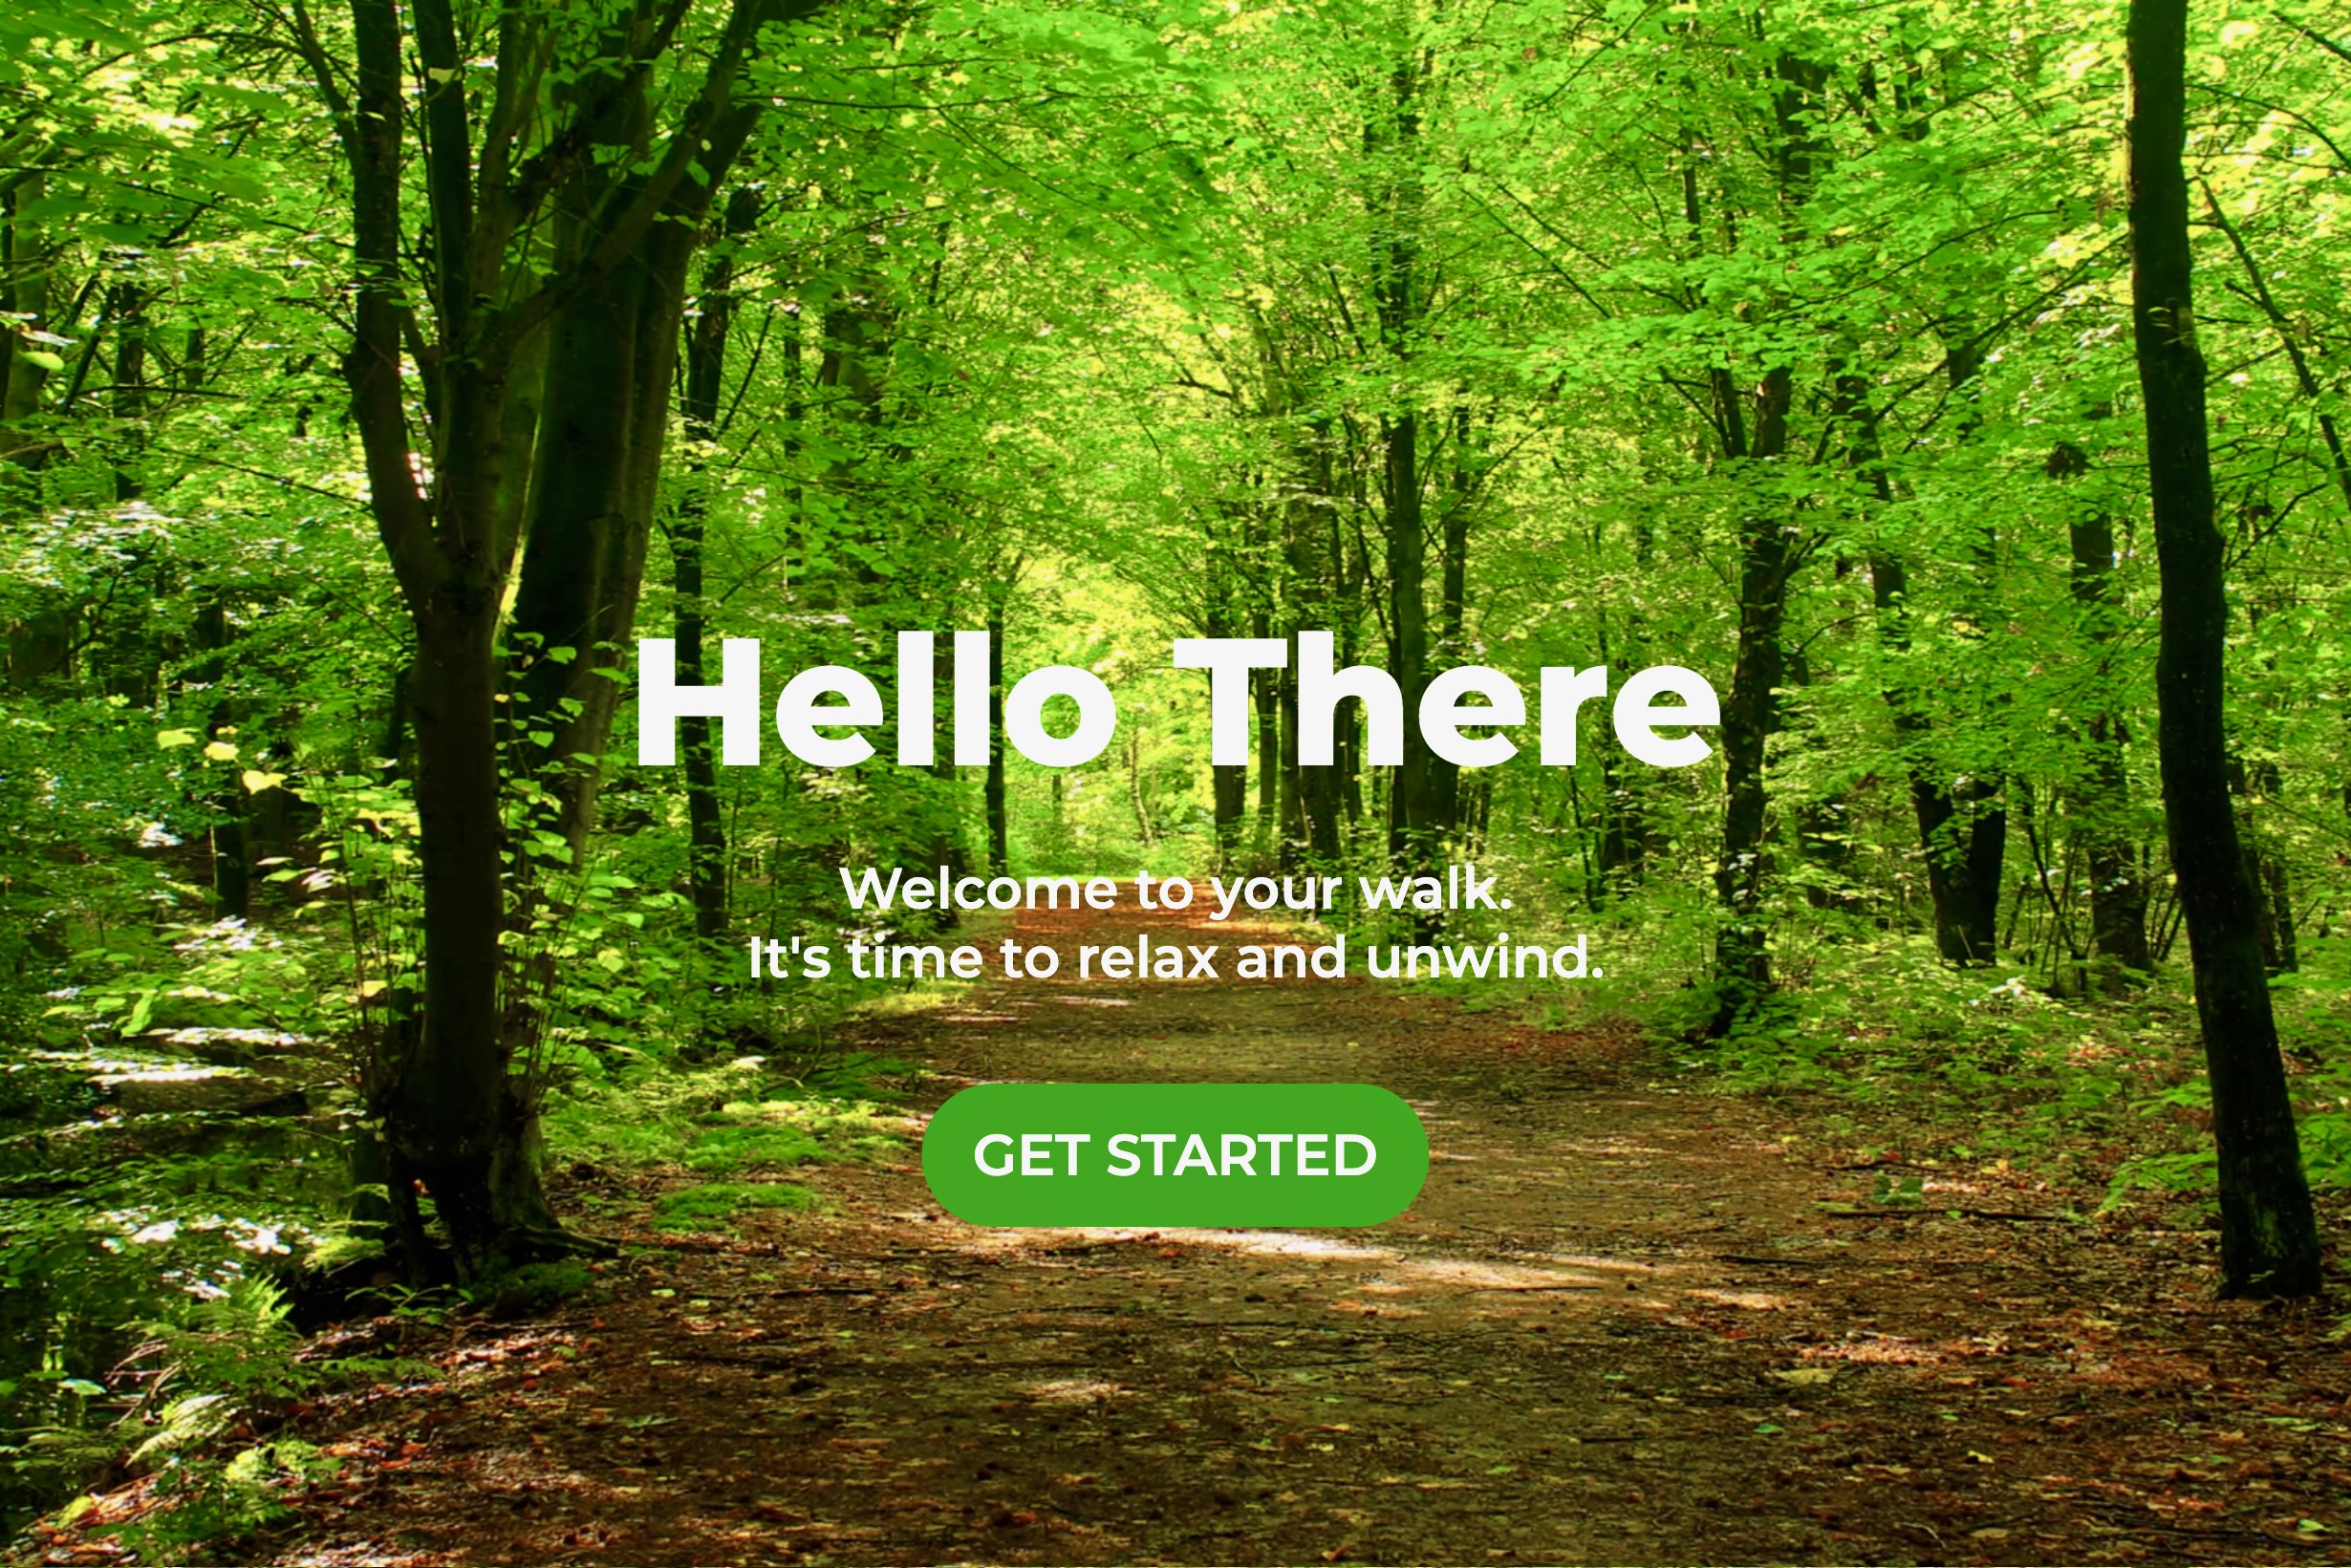 A gif of Hello There page from Parkside Paradise Walks App depicts a walk in the forest